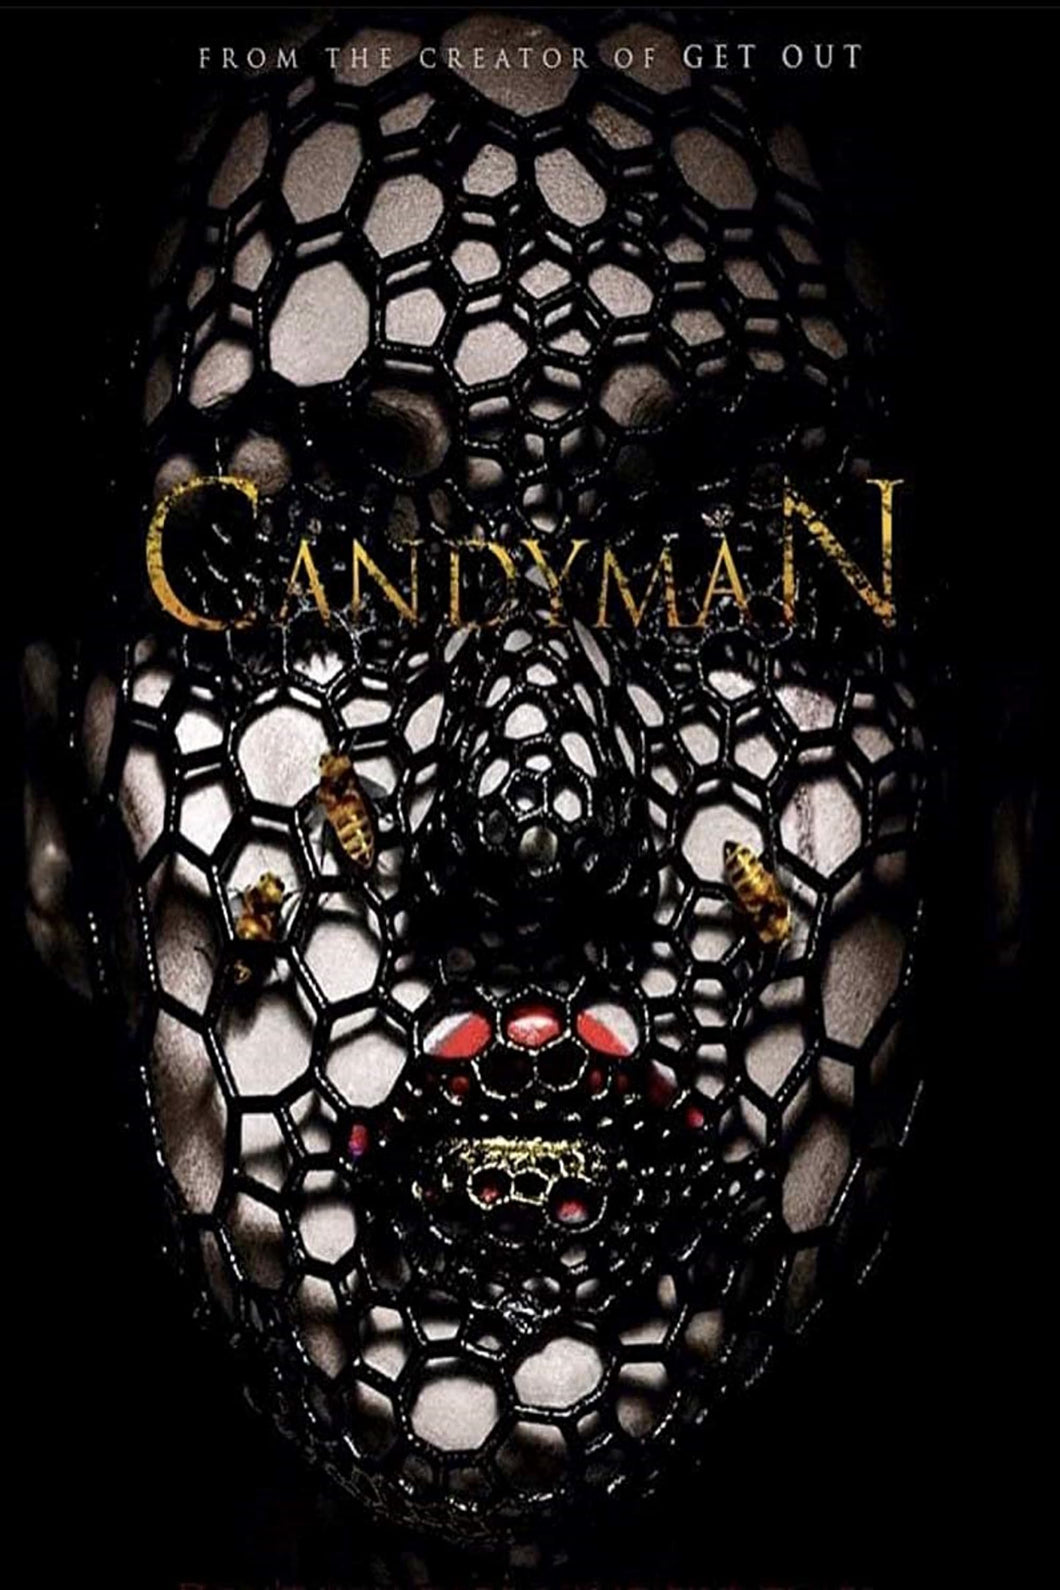 Candyman (2020) Movie Poster High Quality Glossy Paper A1 A2 A3 A4 A3 Framed or Unframed!!!